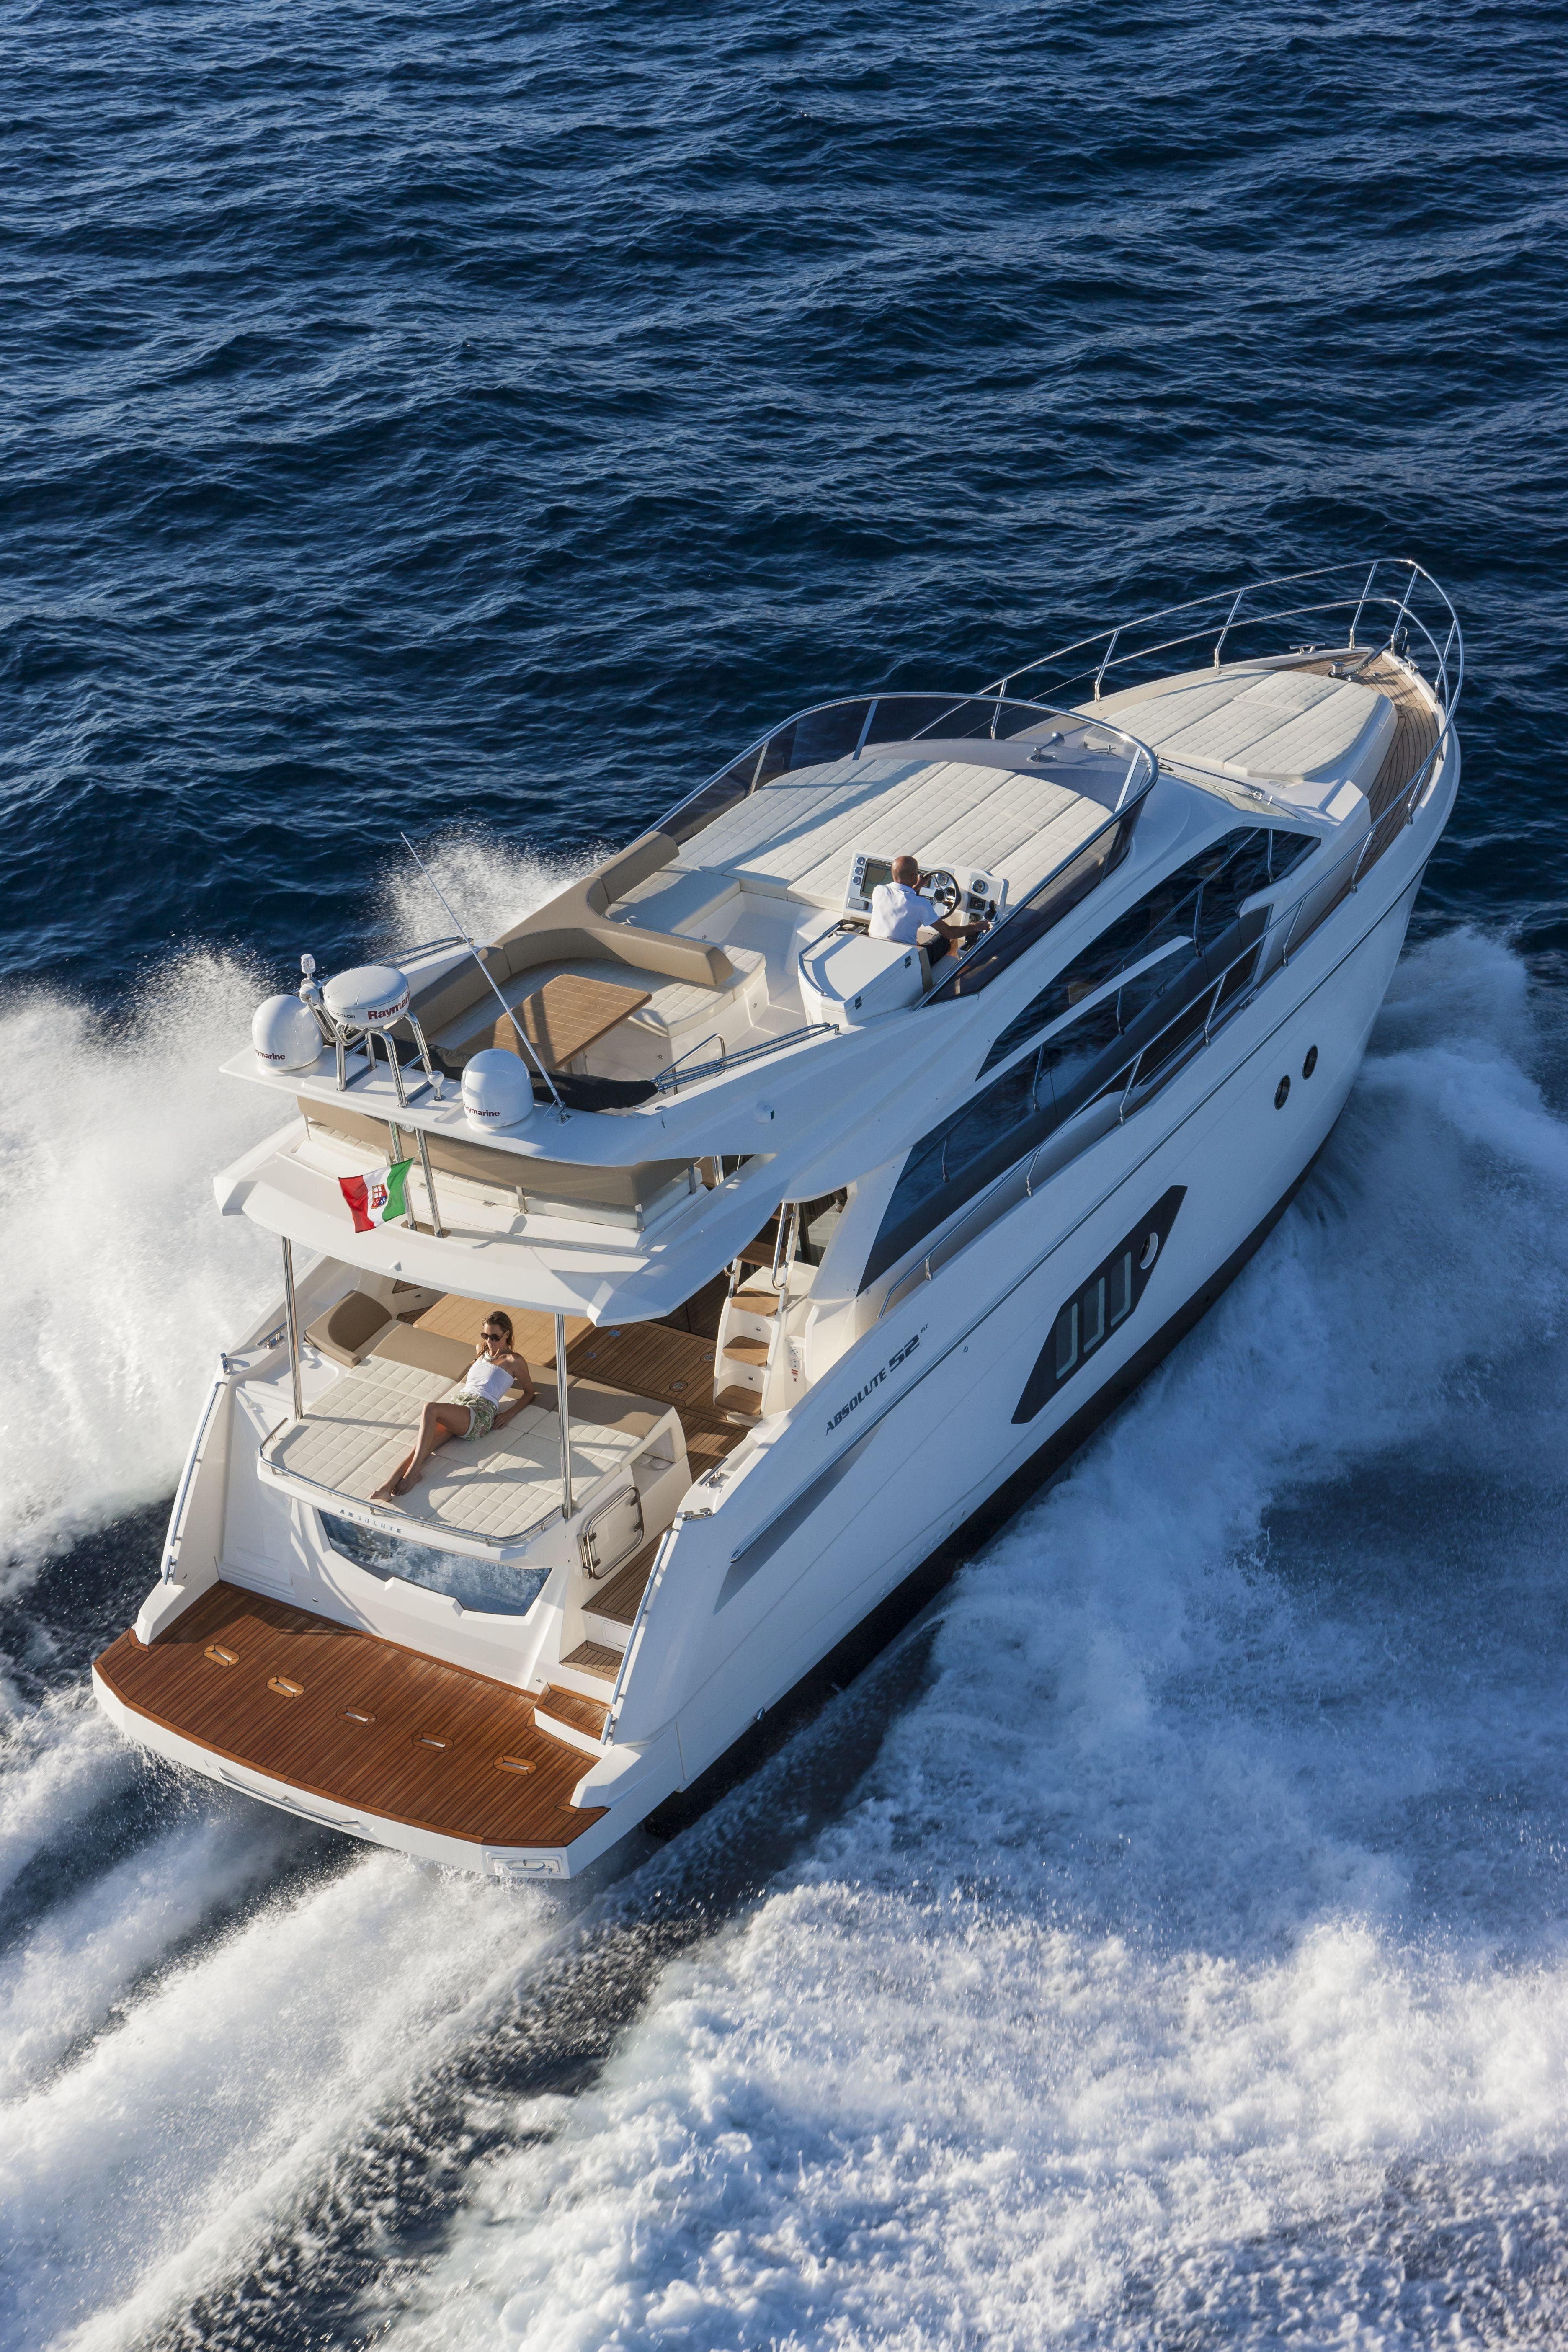 absolute 52 yacht for sale